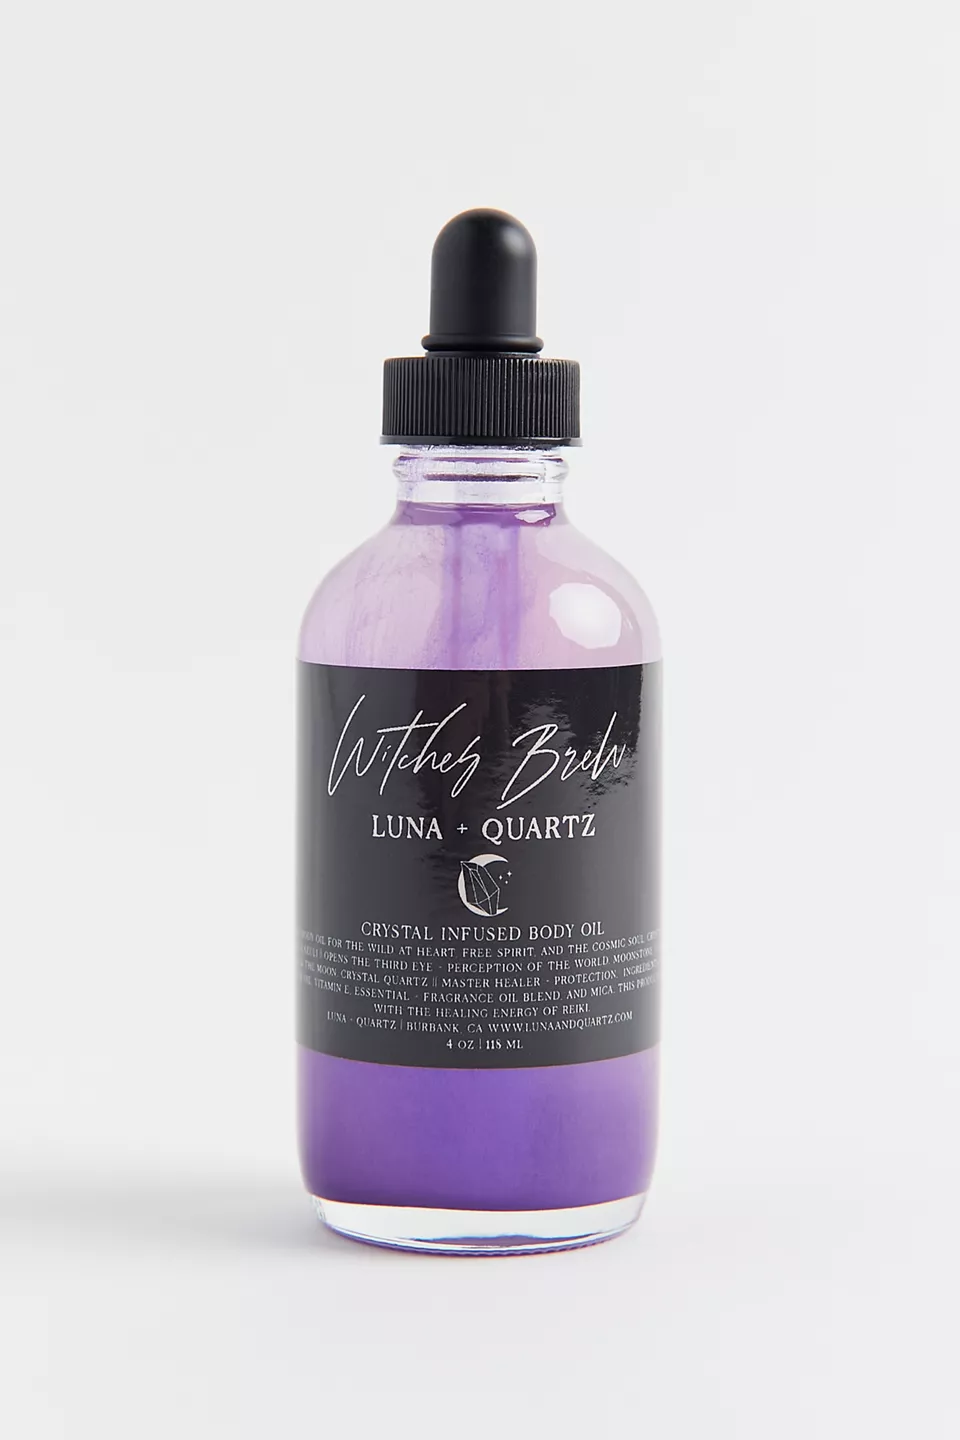 Luna + Quartz Witches Brew Crystal-Infused Body Oil